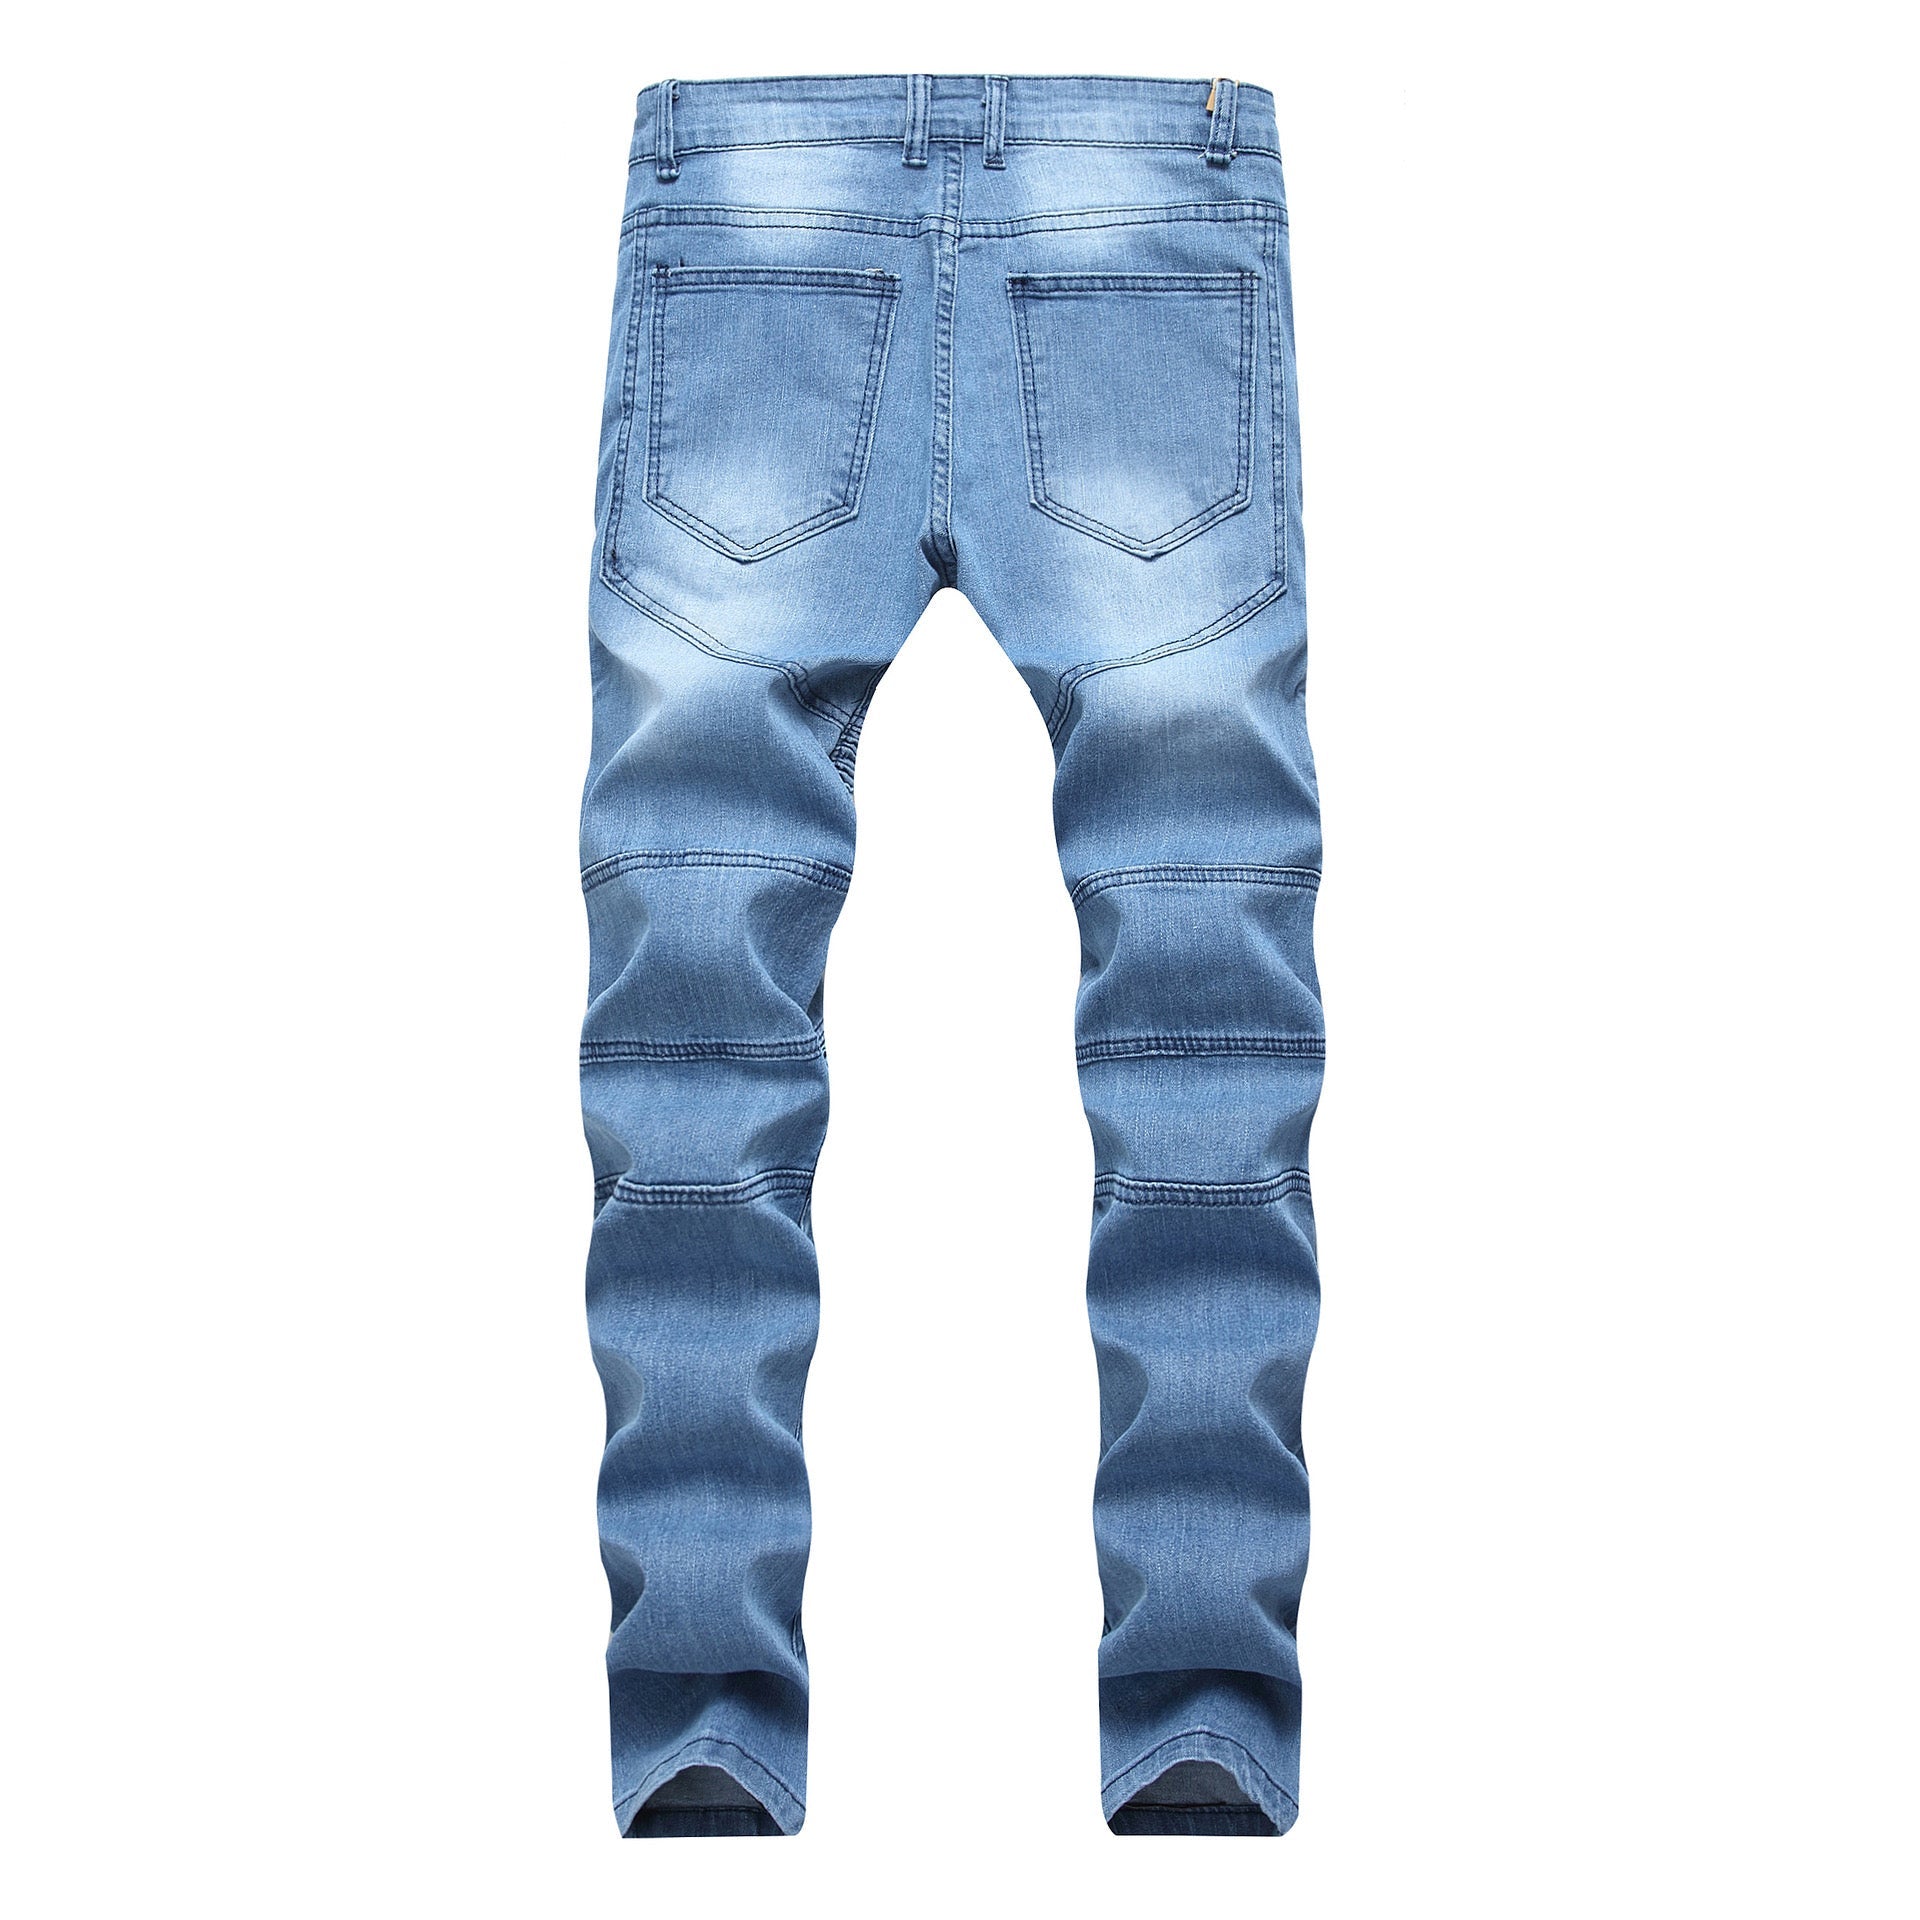 Broo - Blue Jeans for Men - Sarman Fashion - Wholesale Clothing Fashion Brand for Men from Canada